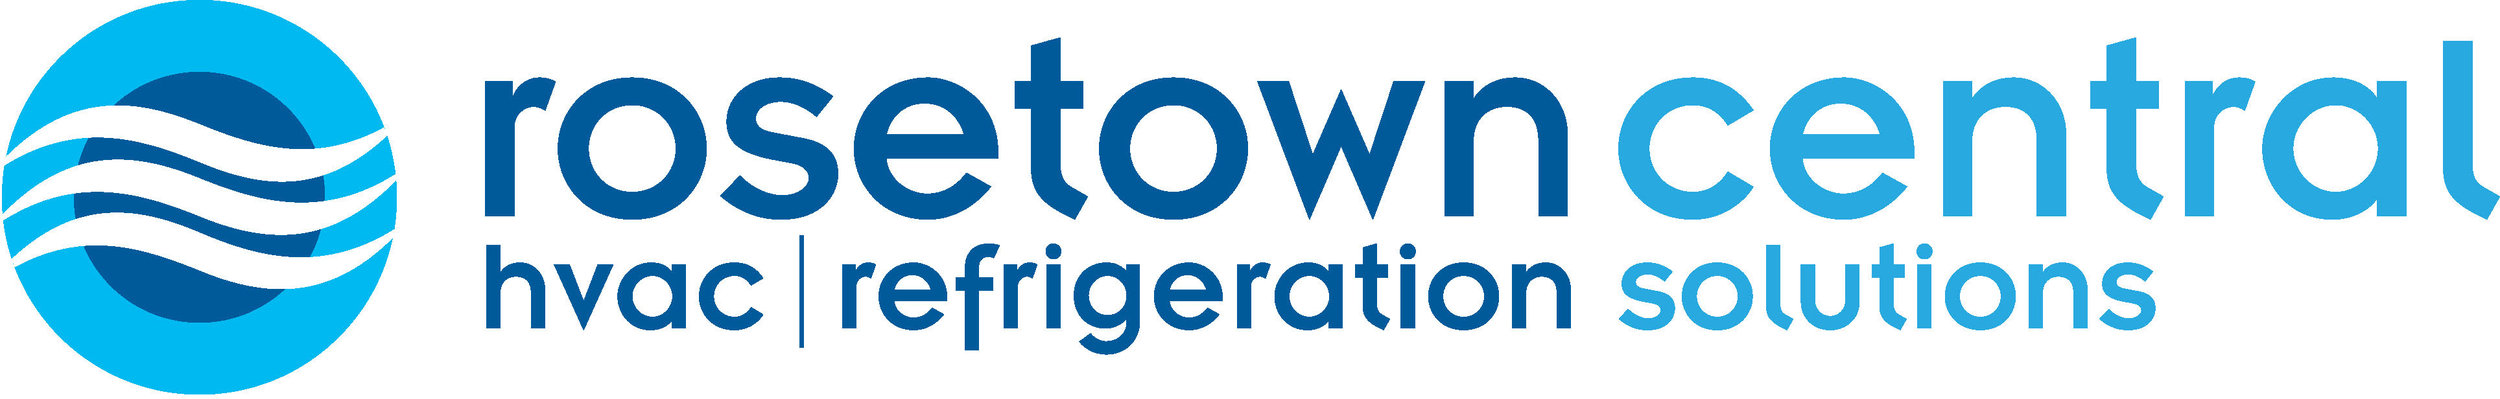 Rosetown Central Refrigeration and Air Conditioning Ltd.